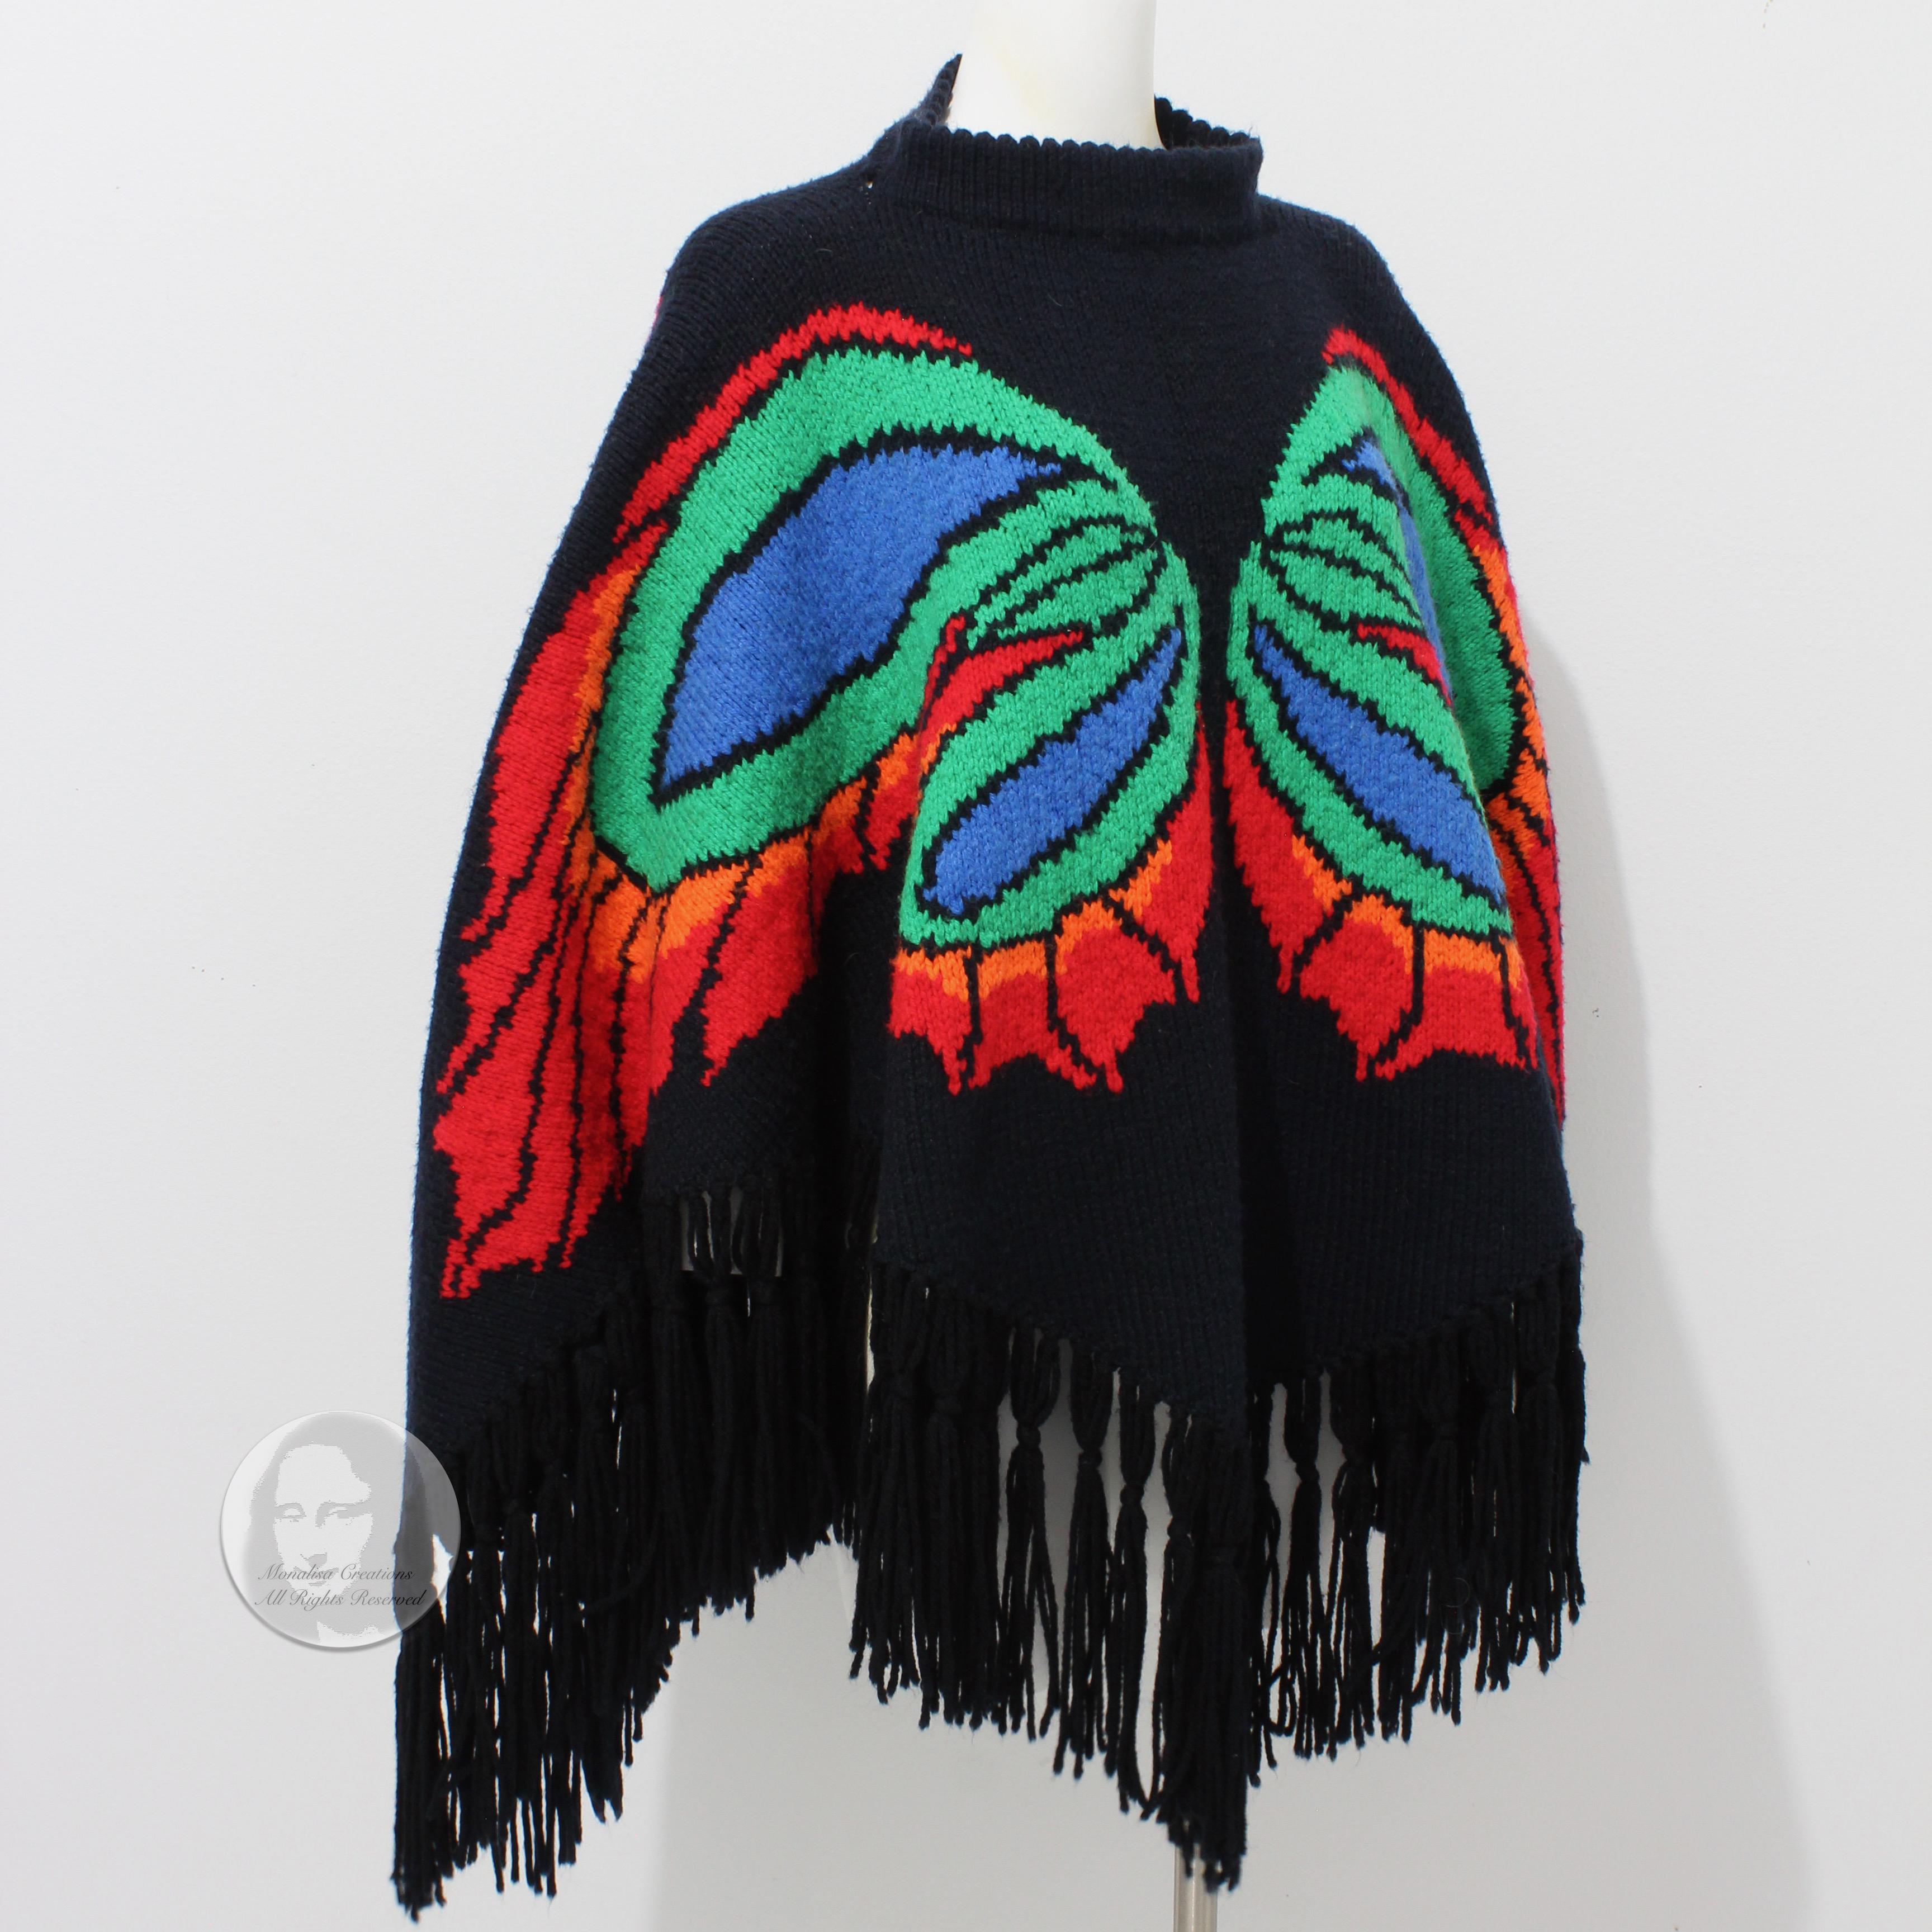 Butterfly Poncho Multicolor Knit with Fringe Trim Pullover Style Vintage OSFM  In Good Condition For Sale In Port Saint Lucie, FL